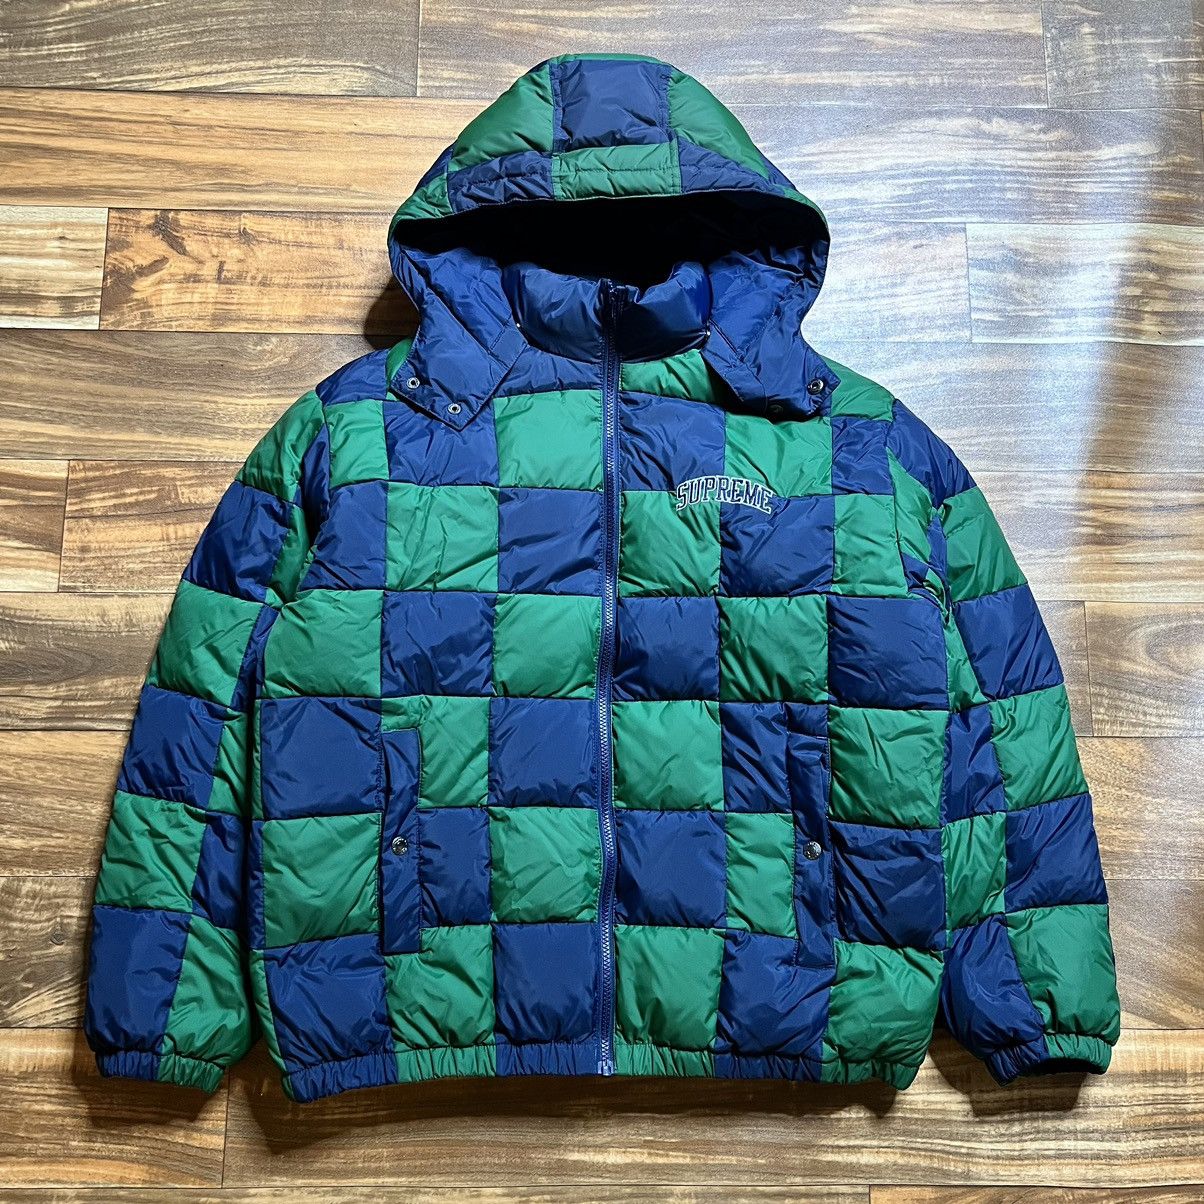 Supreme Supreme FW 19 Checkerboard Puffy Down Jacket Large | Grailed